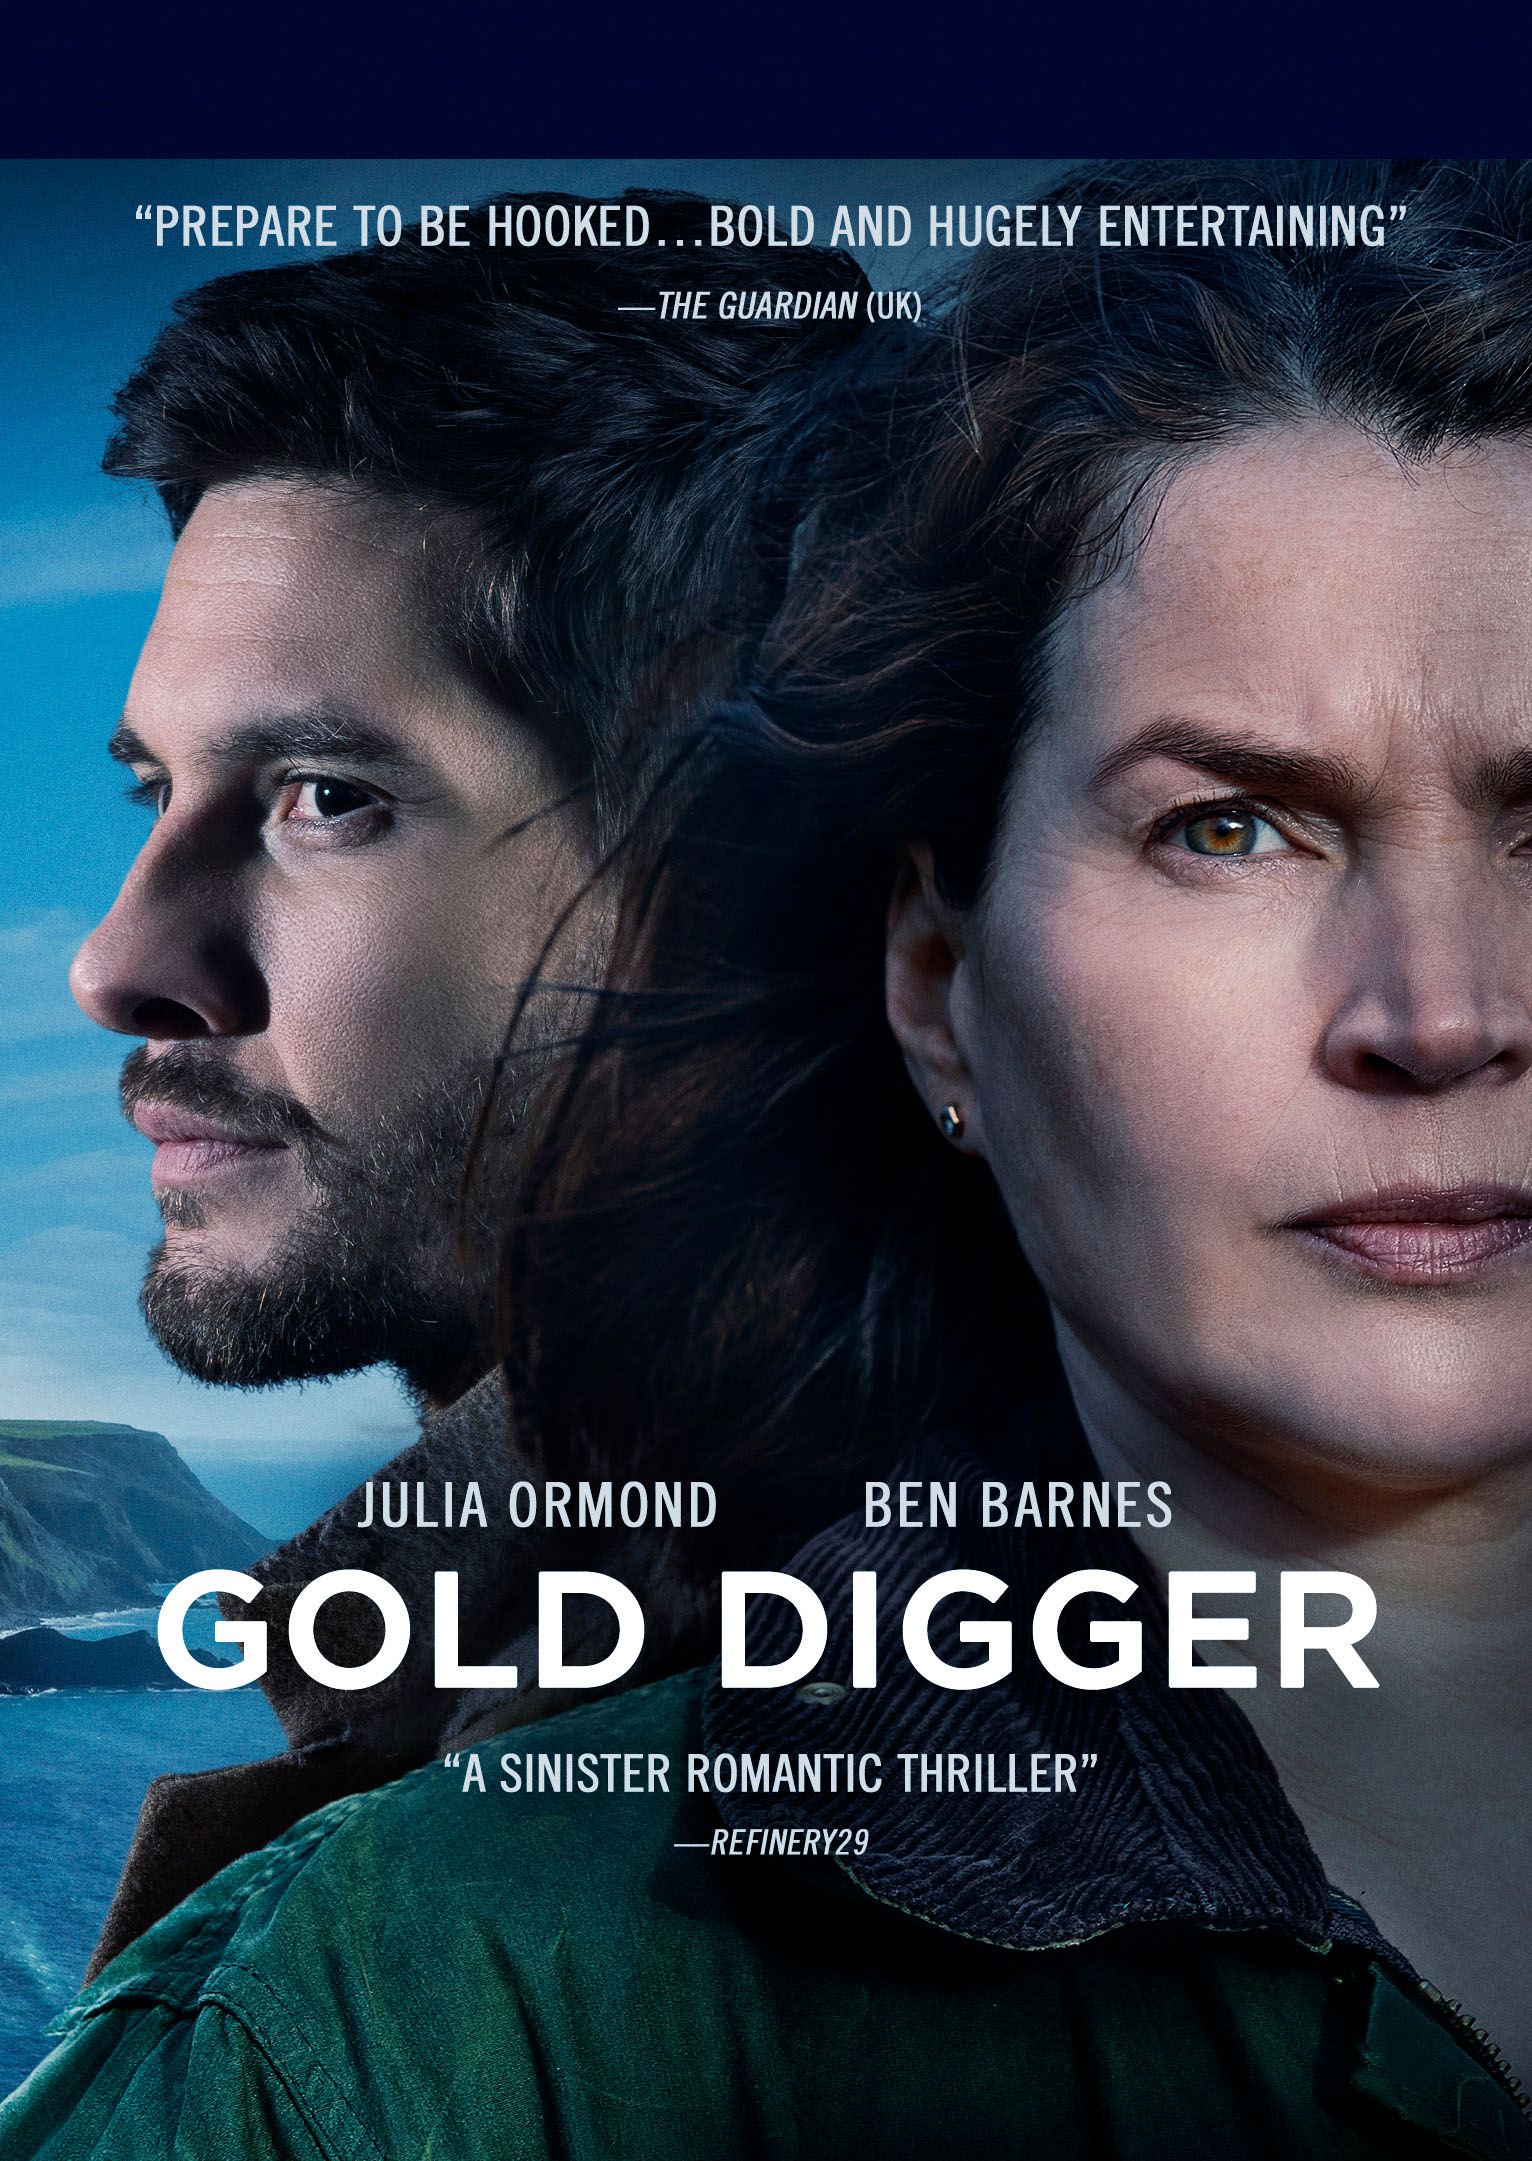 Gold Digger Premieres on Acorn TV May 4th - The Game of Nerds